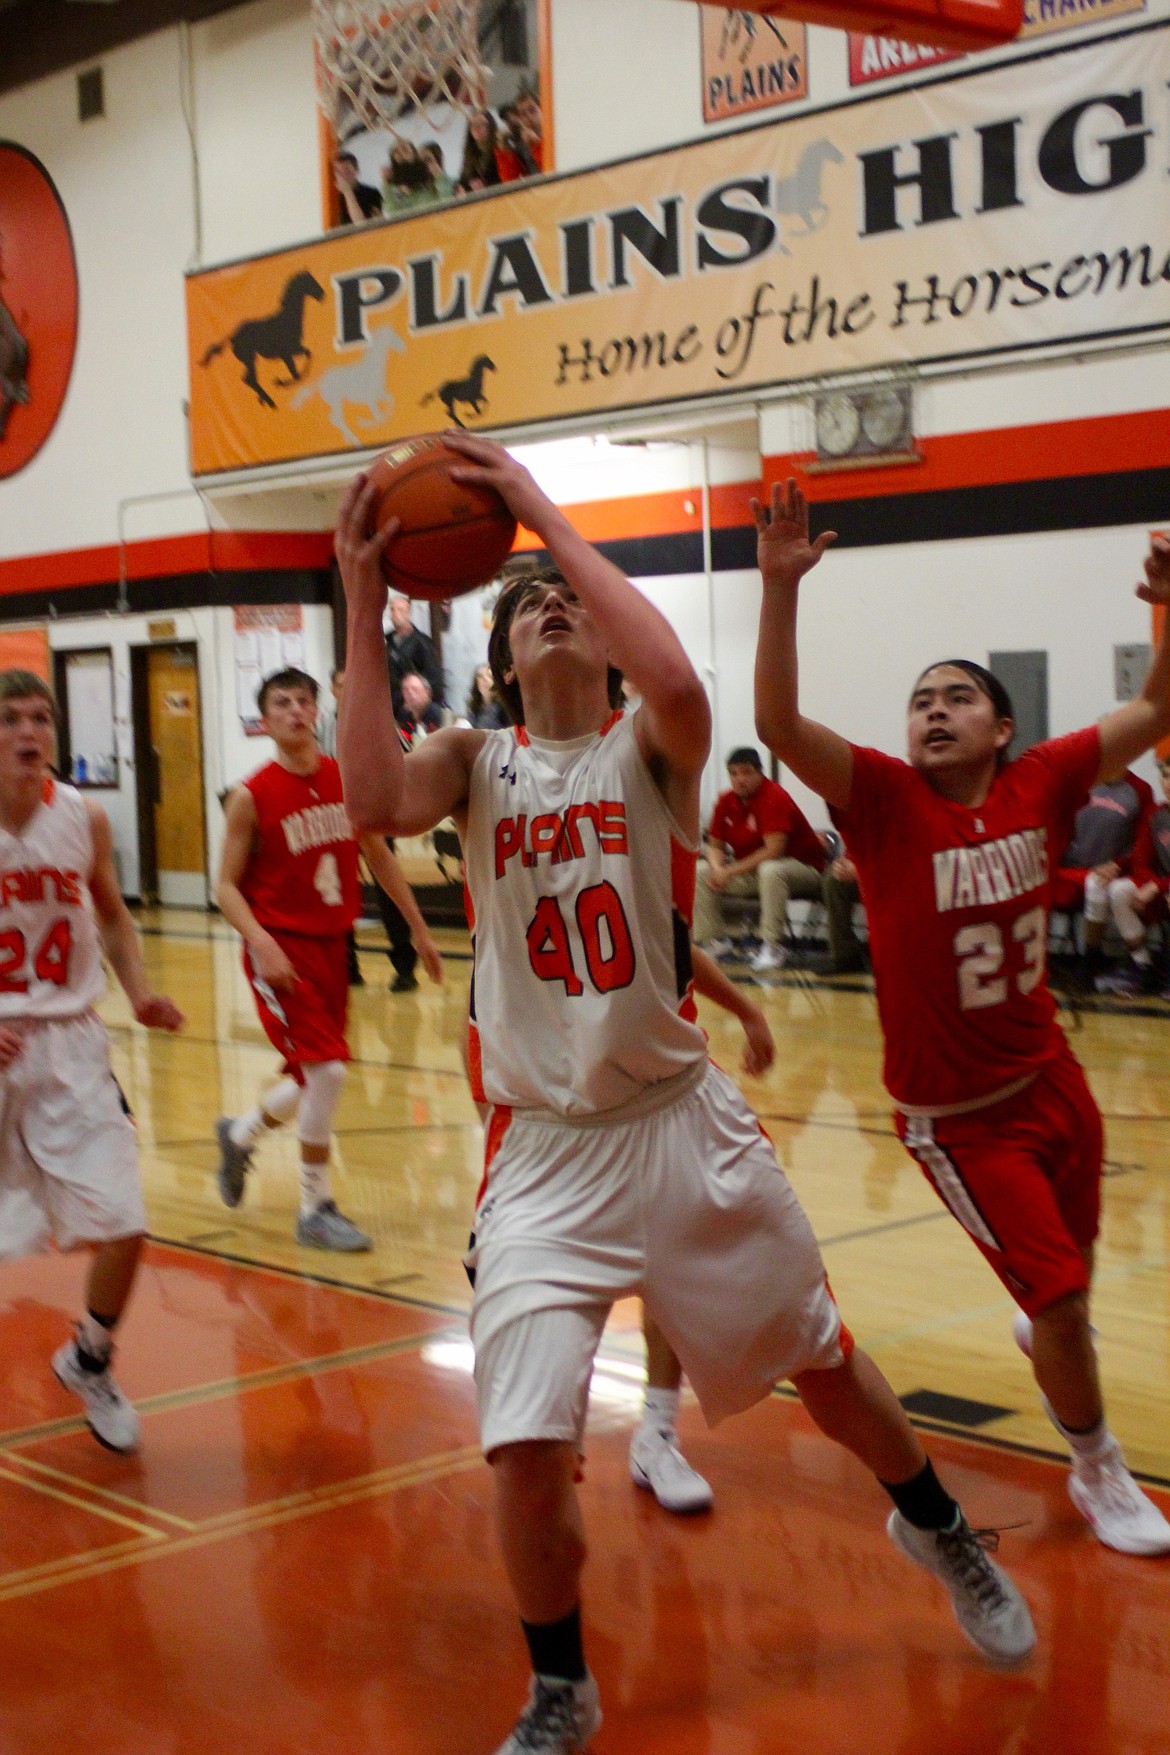 Jay VonHeeder (#40) of the Horsemen moves to the basket with the ball against the defense of Alex Moran (23), as Sam Rehbein (24) and Warriors player Philip Malatare (#4) watch.